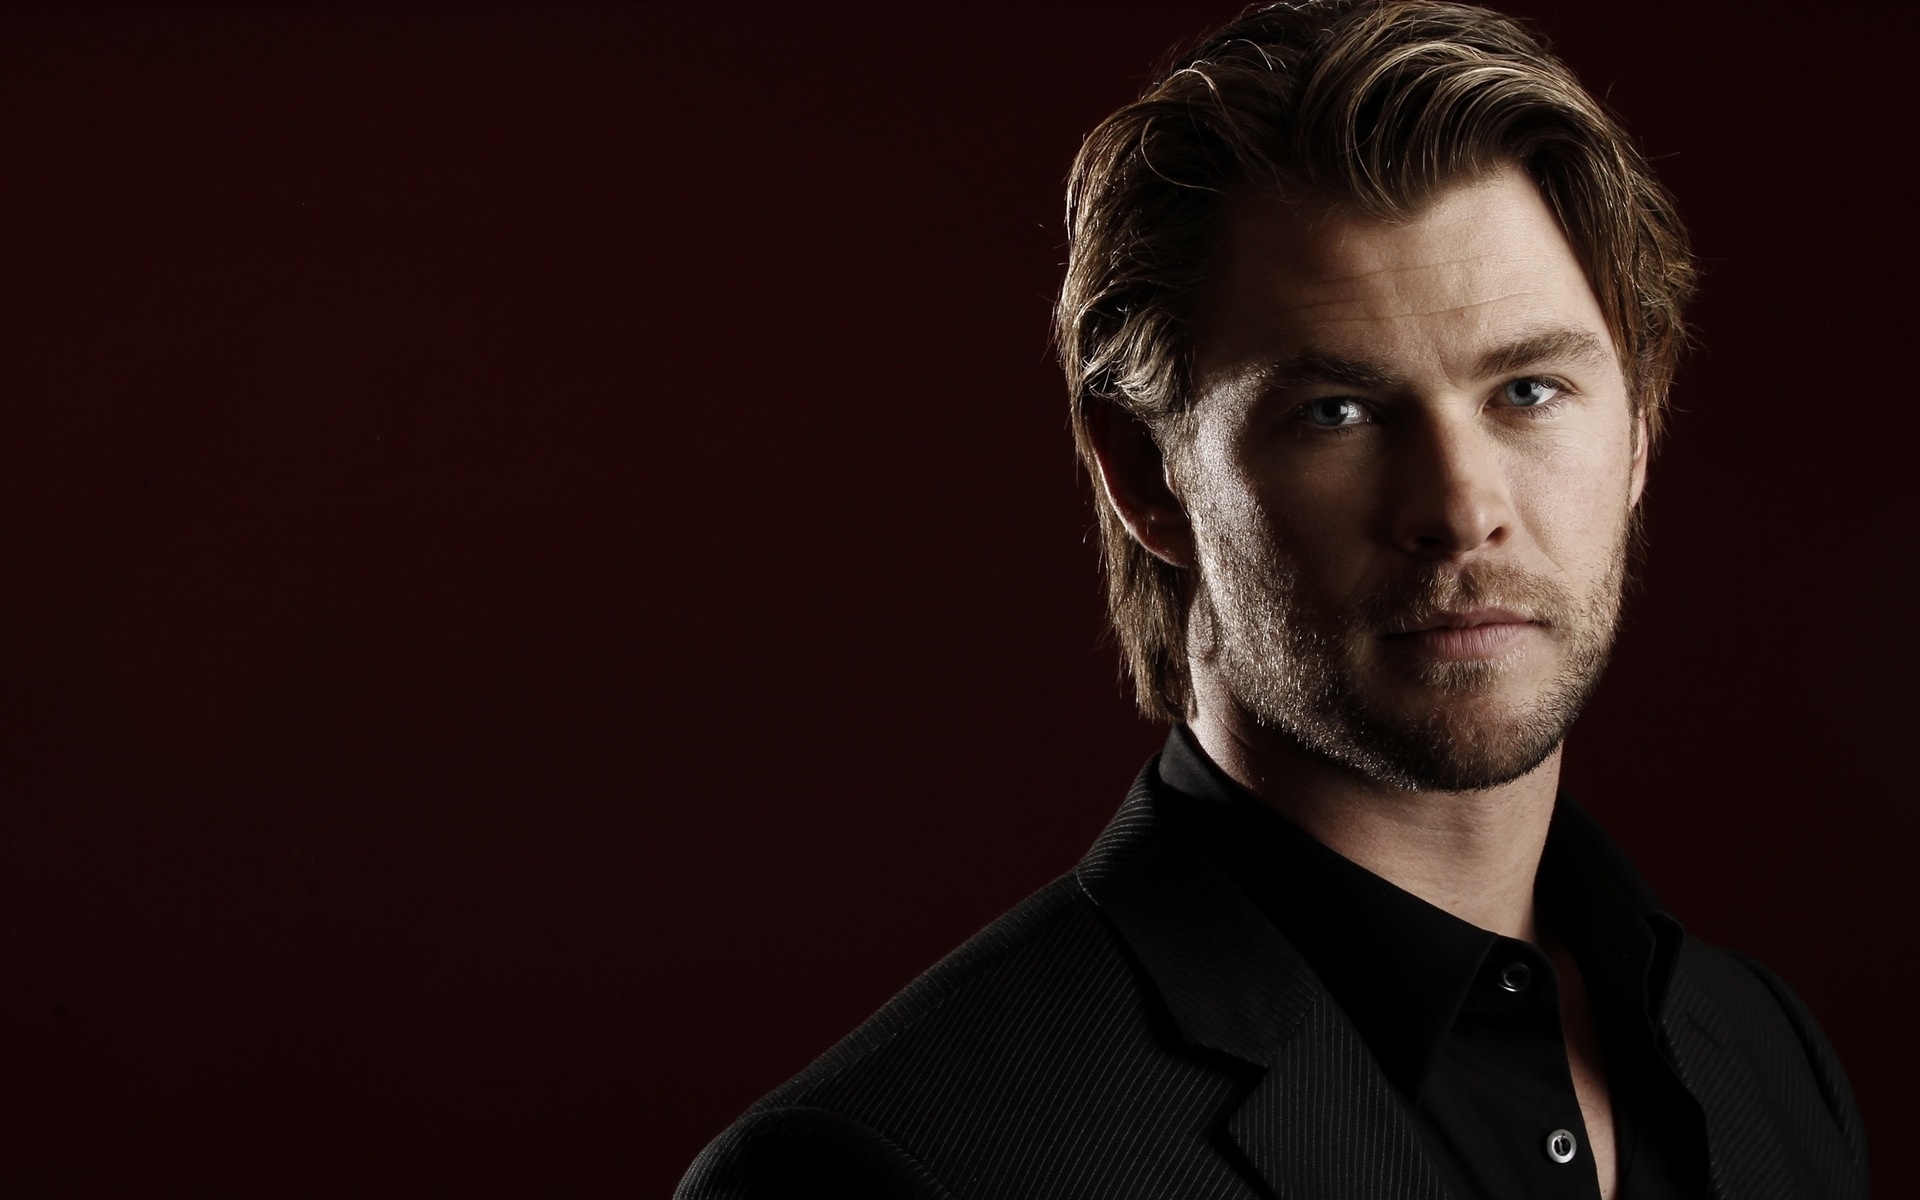 Chris Hemsworth: Notable role, Formula One race driver James Hunt in Ron Howard’s critically praised Rush (2013). 1920x1200 HD Wallpaper.